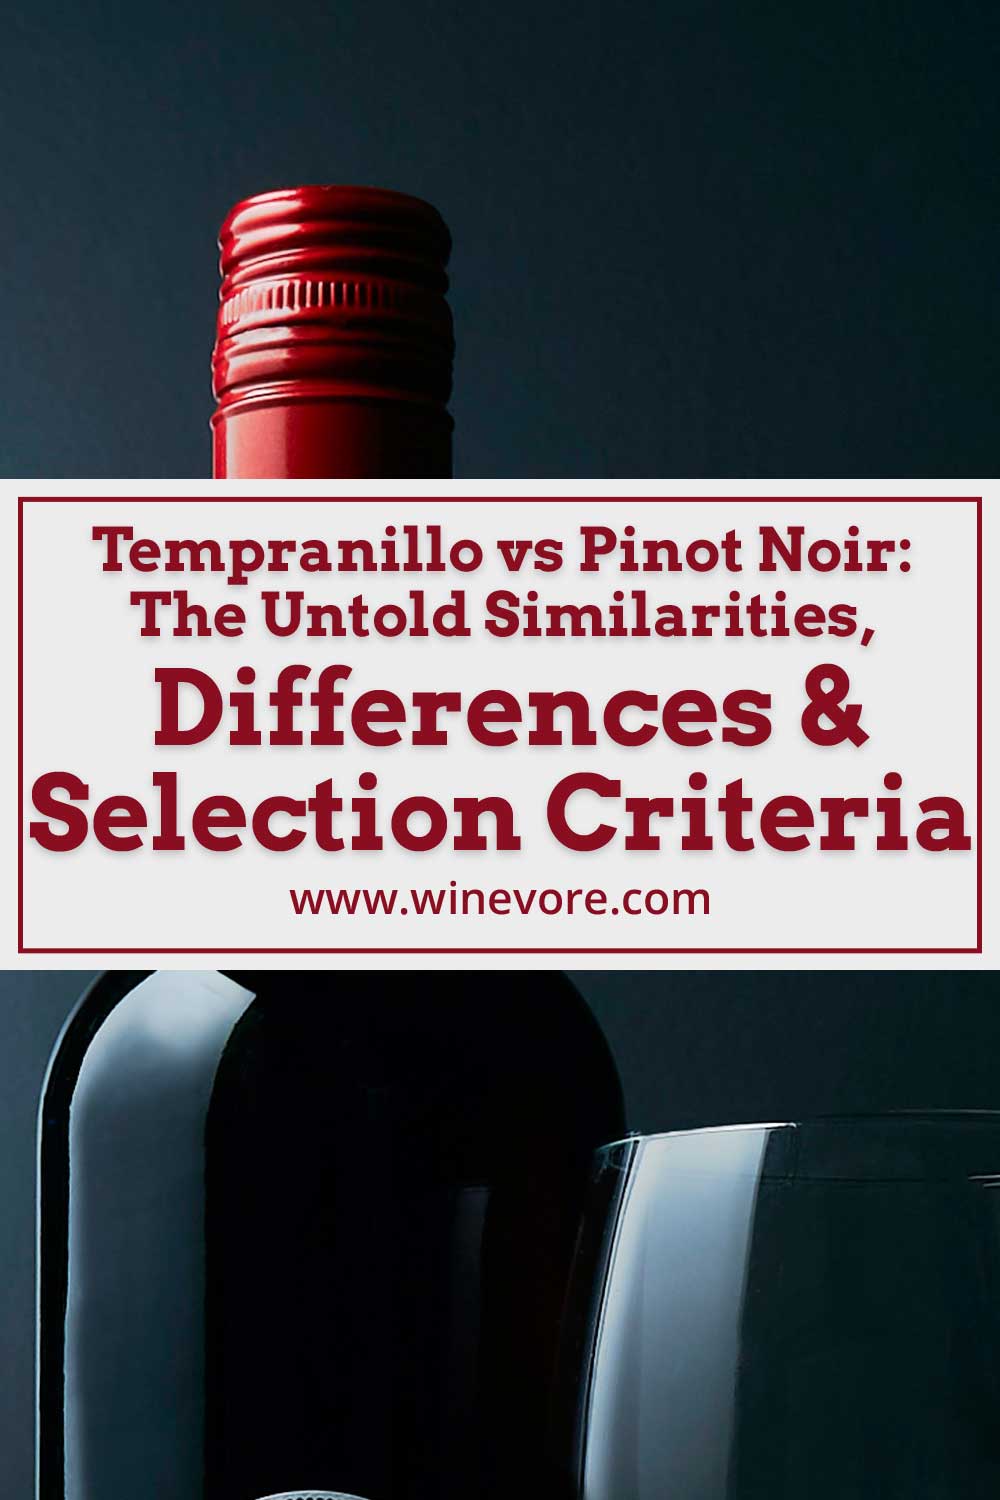 A red wine bottle and glass in dark surface -Tempranillo vs Pinot Noir: The Untold Similarities, Differences & Selection Criteria.